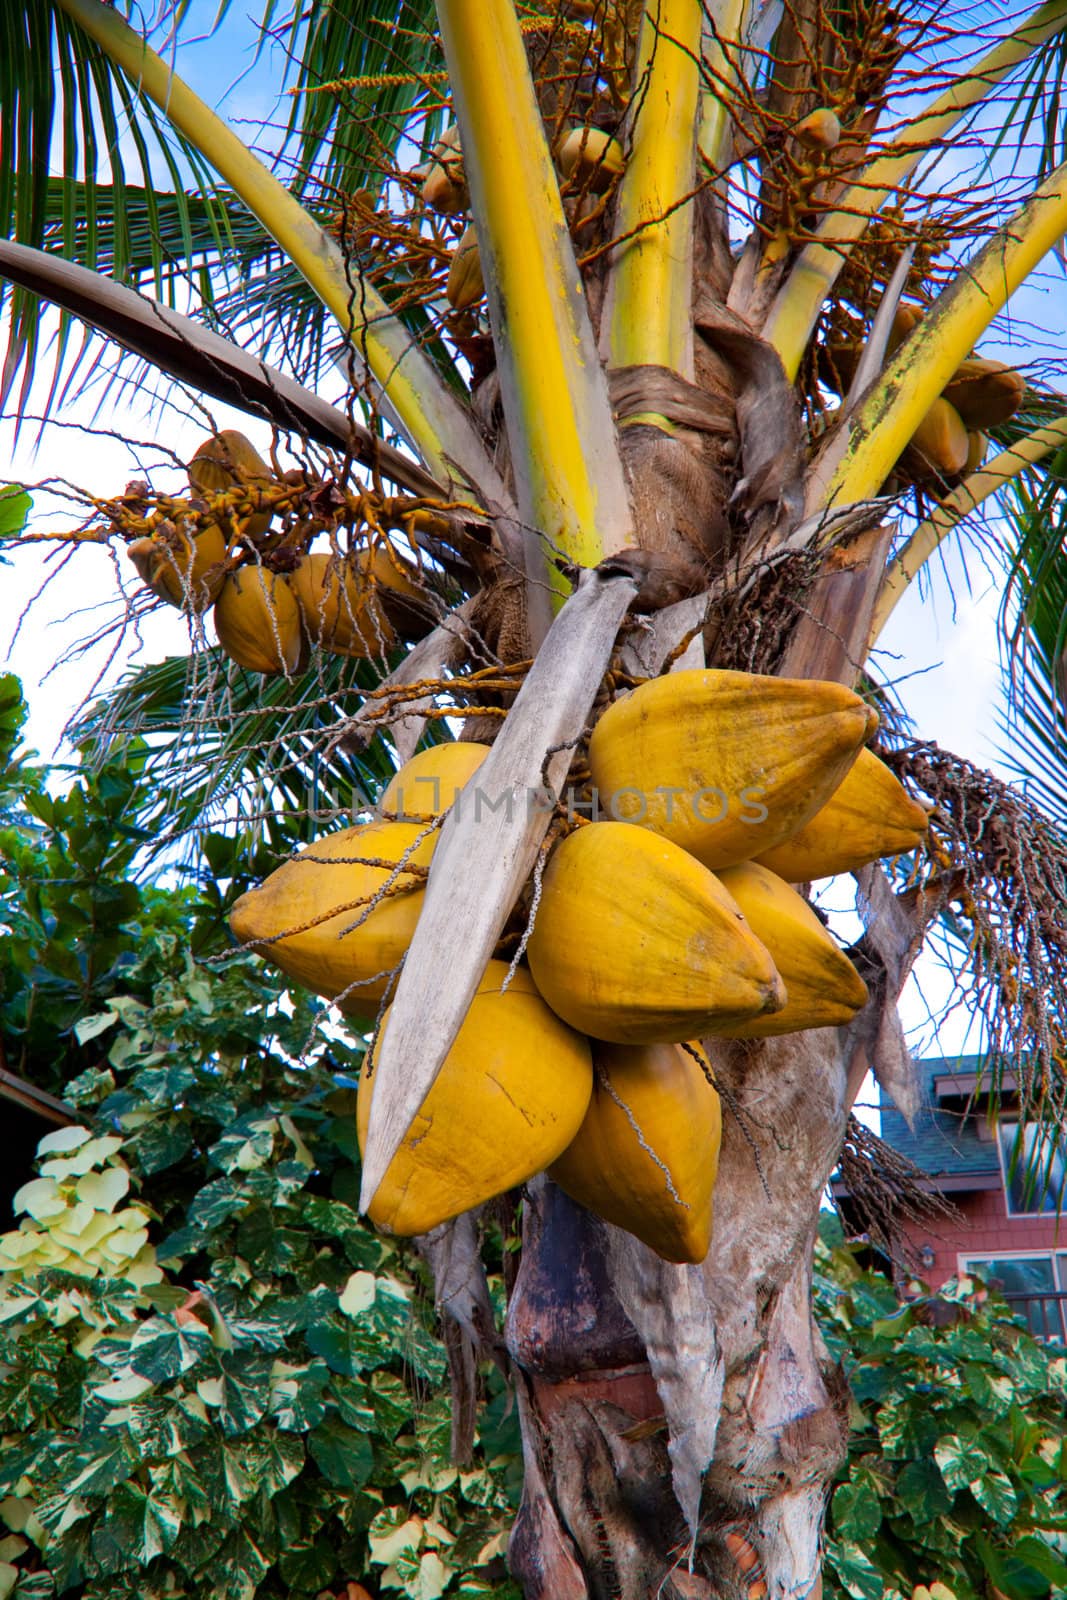 A palm tree with coconuts hanging on it at a resort getaway in Oahu Hawaii.